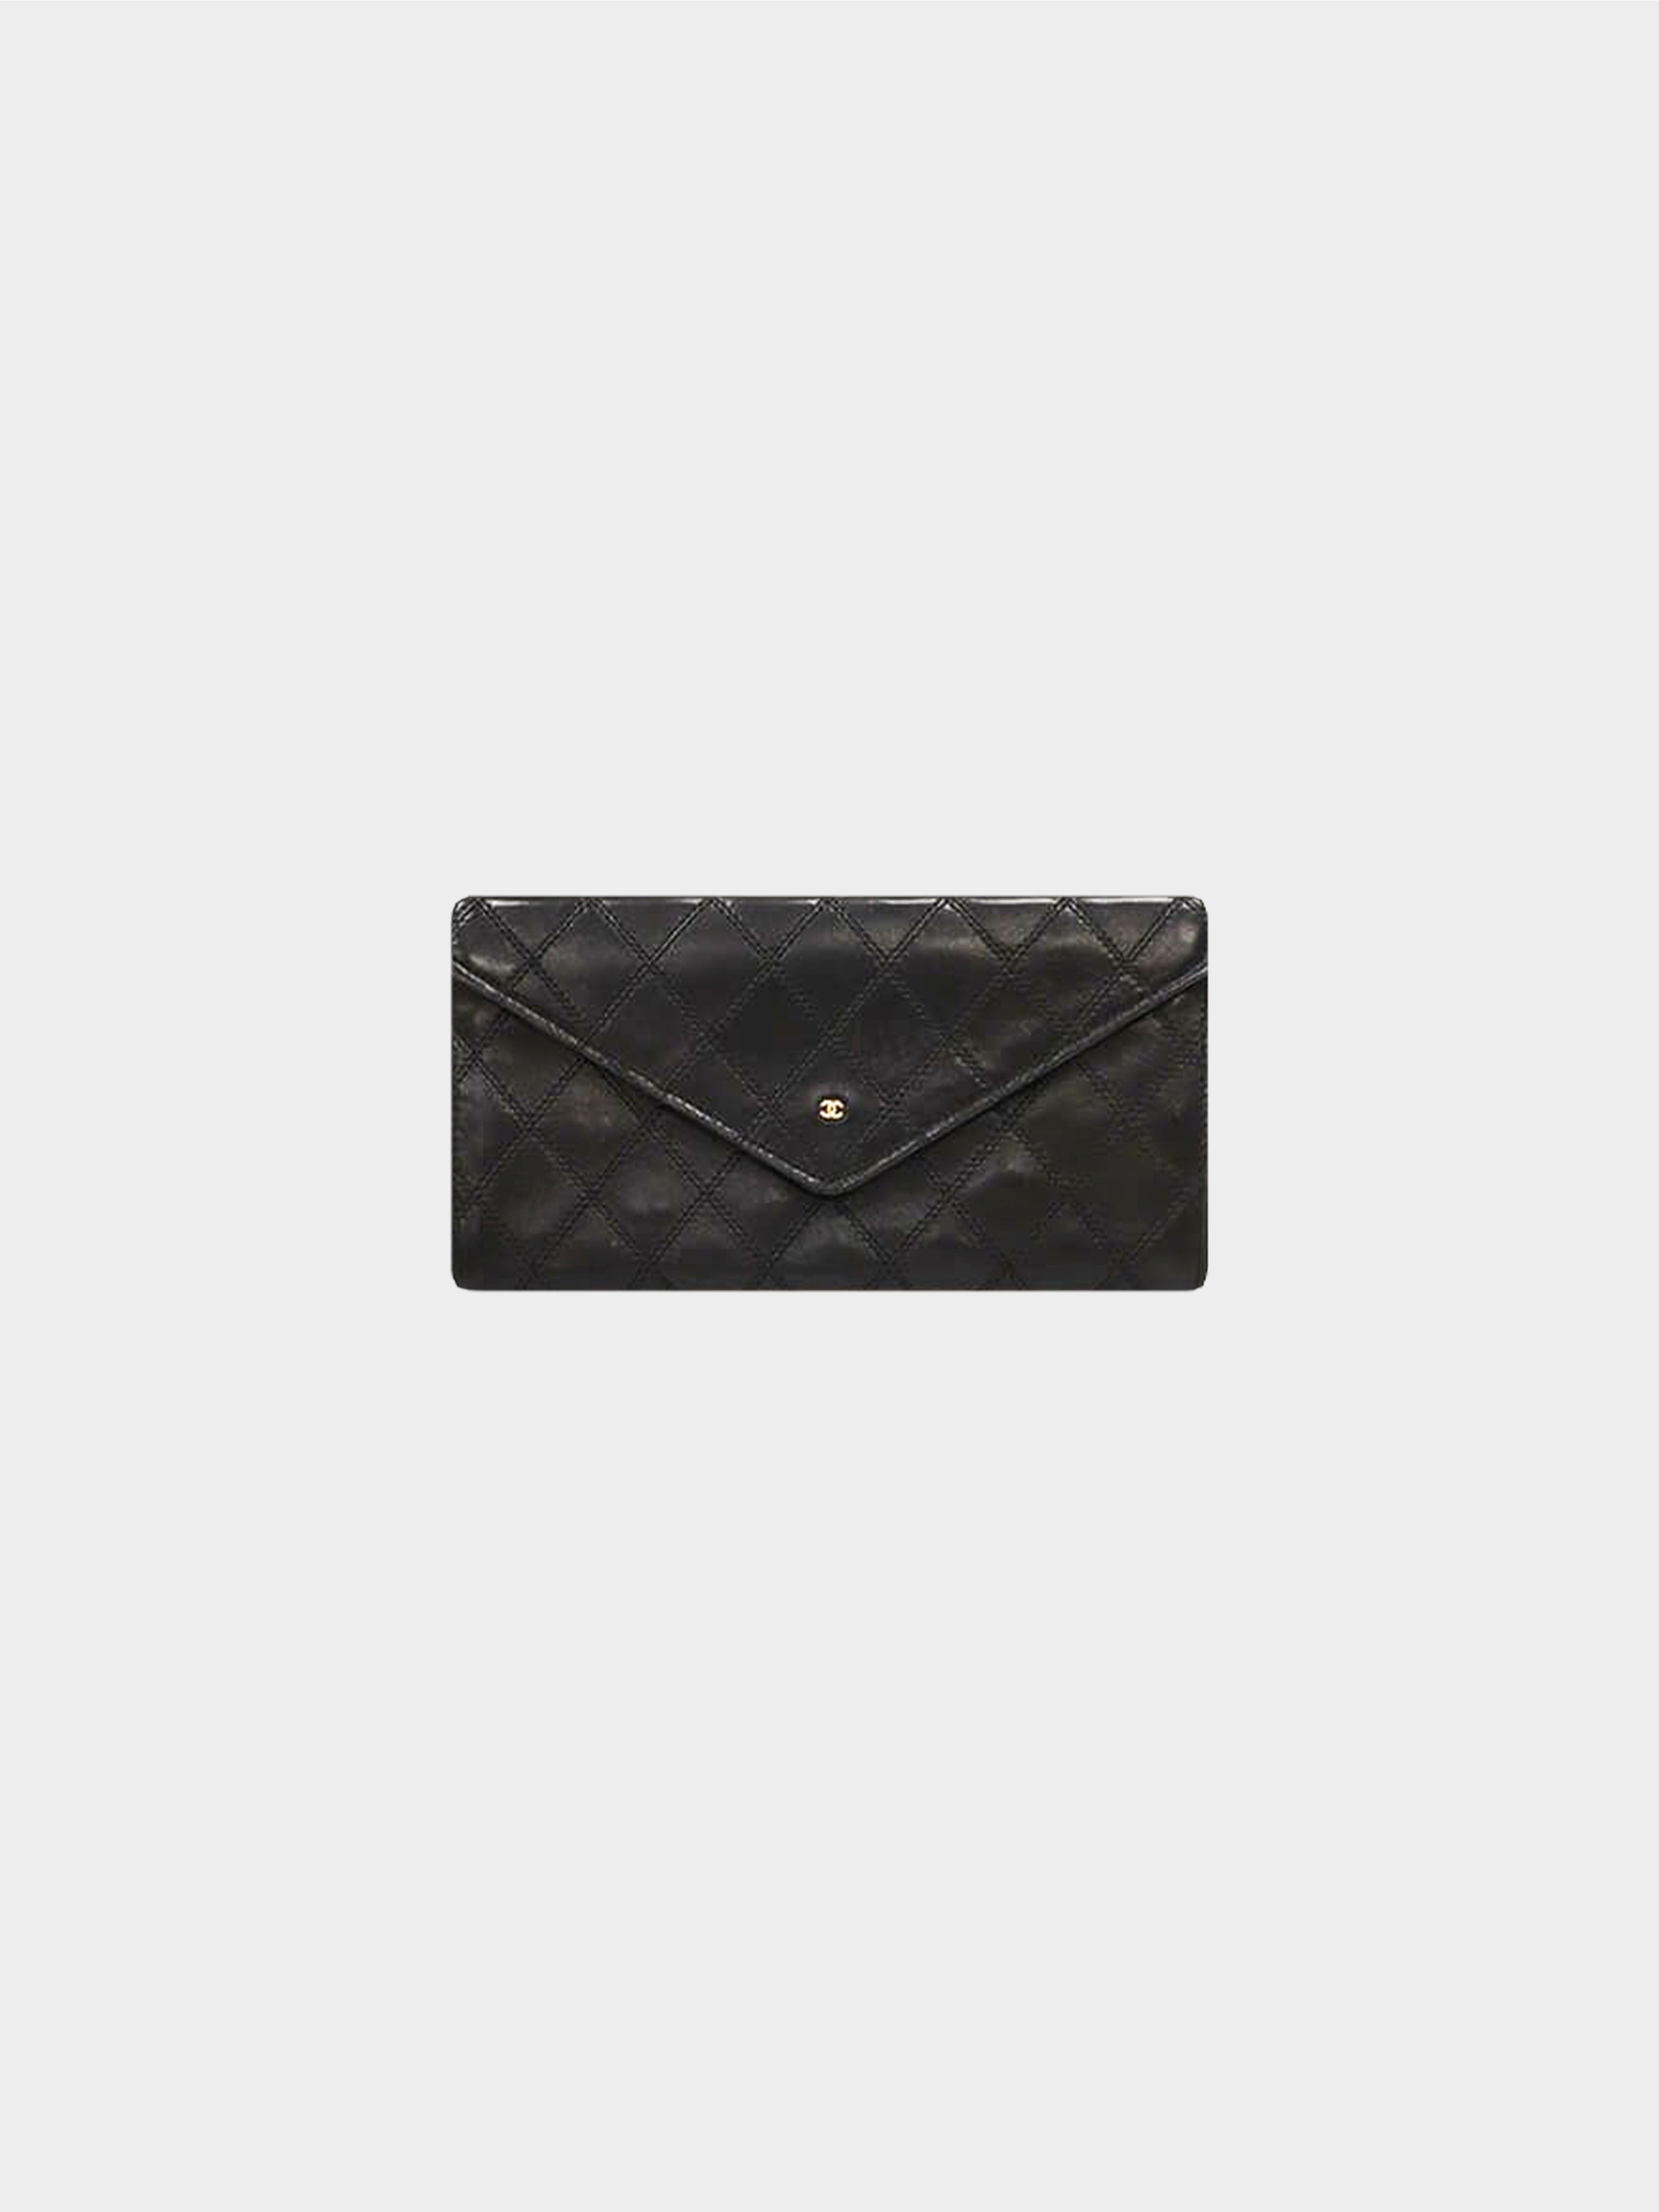 Chanel Black Quilted Lambskin Classic Long Flap Wallet Q6A0171IKB021